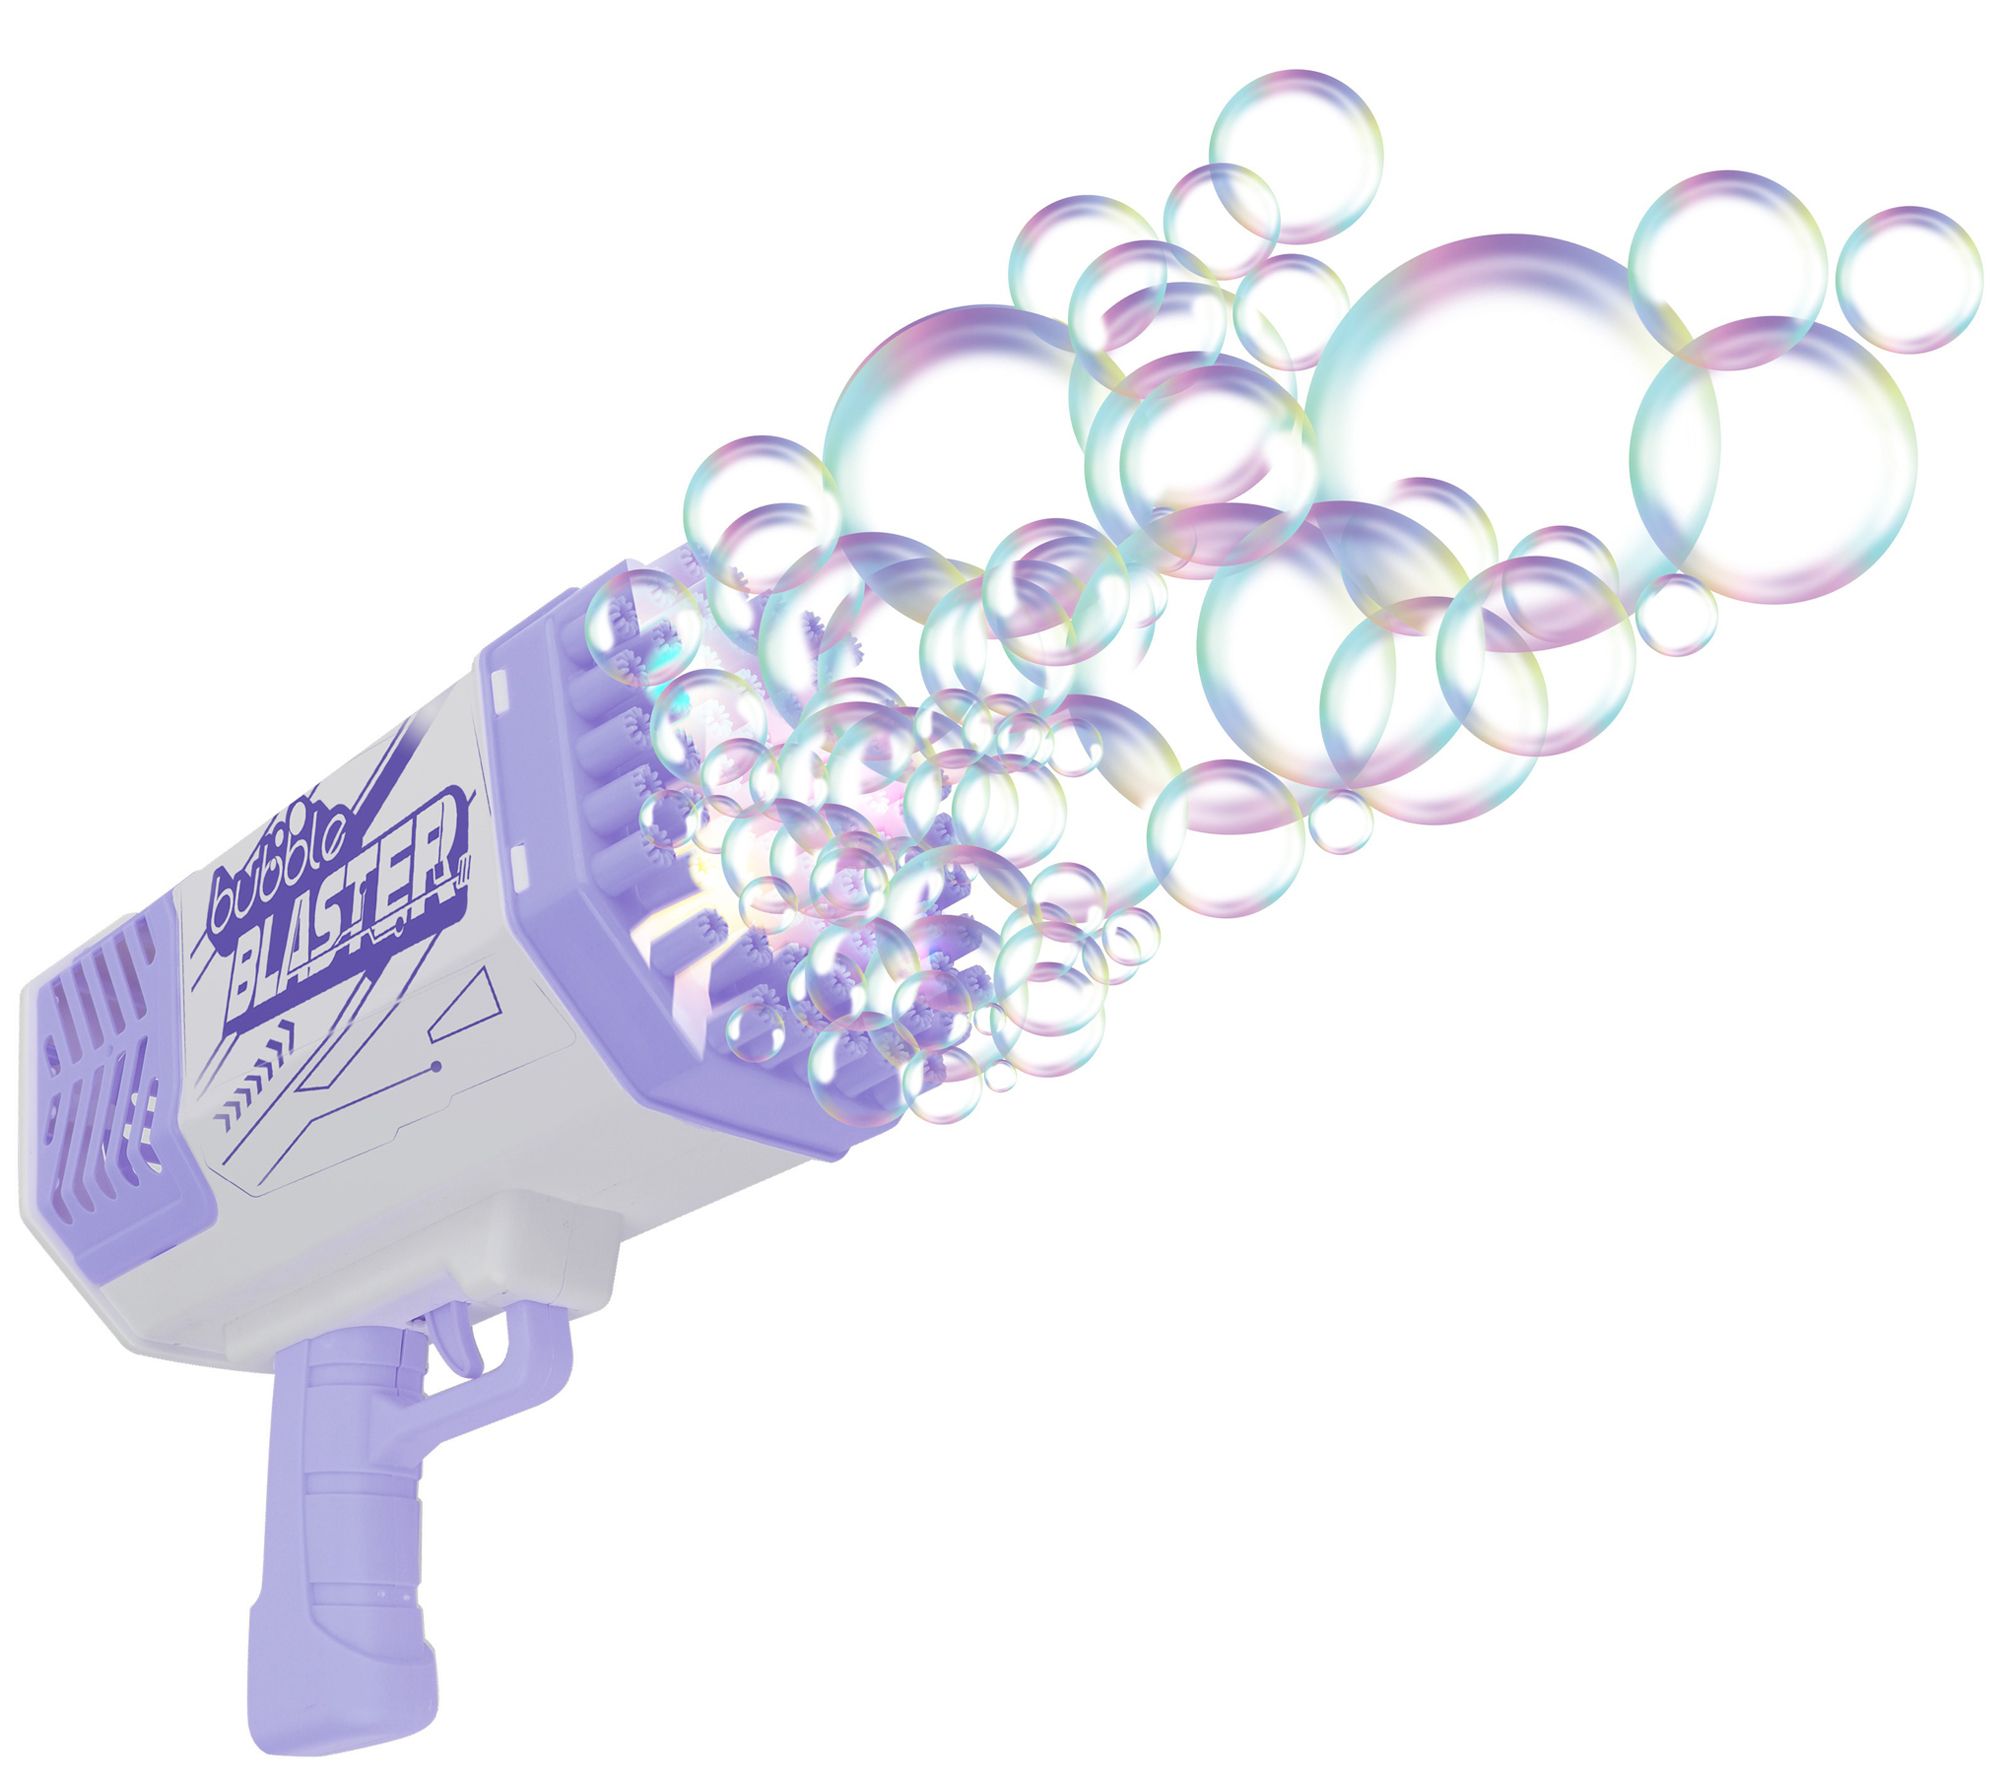 Bubble Machine Gun, Purple Bubble Gun with Lights/Bubble Solution, 69 Holes  Bubbles Machine for Adults Kids, Summer Toy Gift for Outdoor Indoor